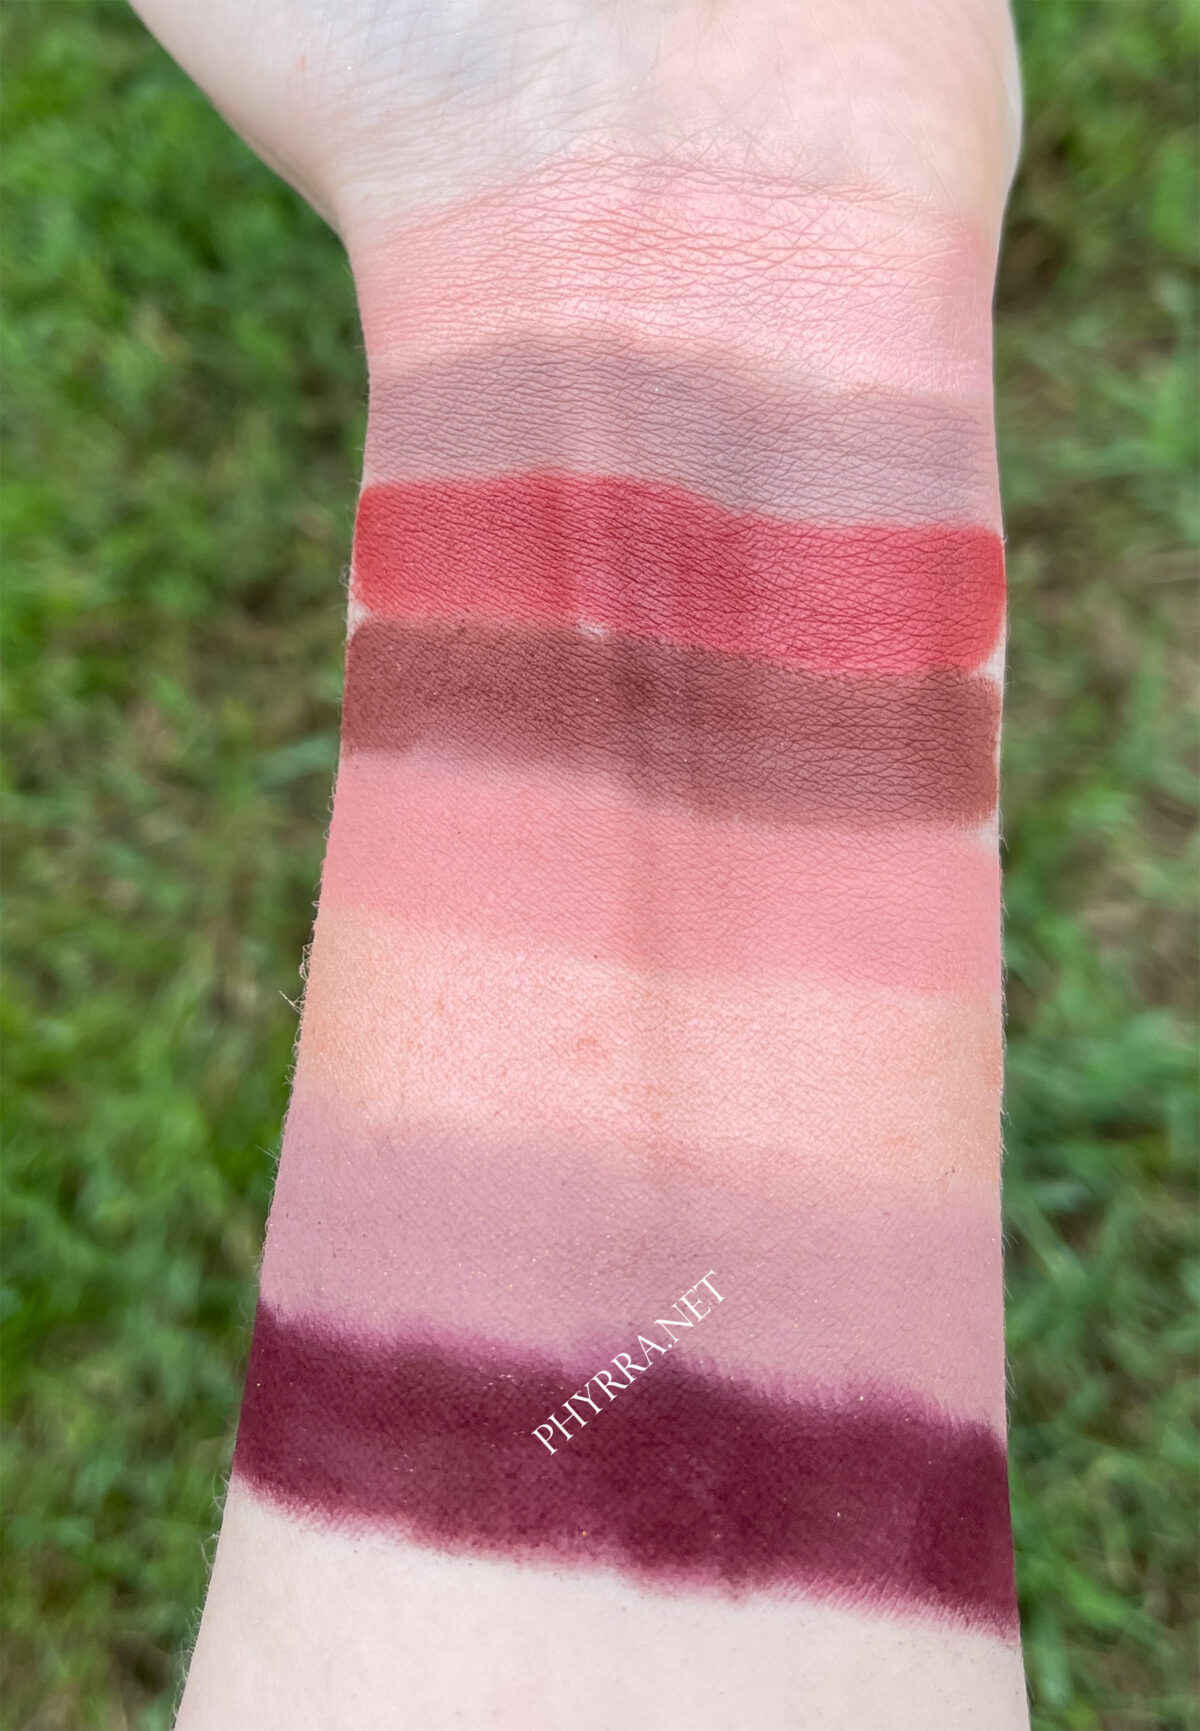 Lime Crime Greatest Hits Swatches on pale skin